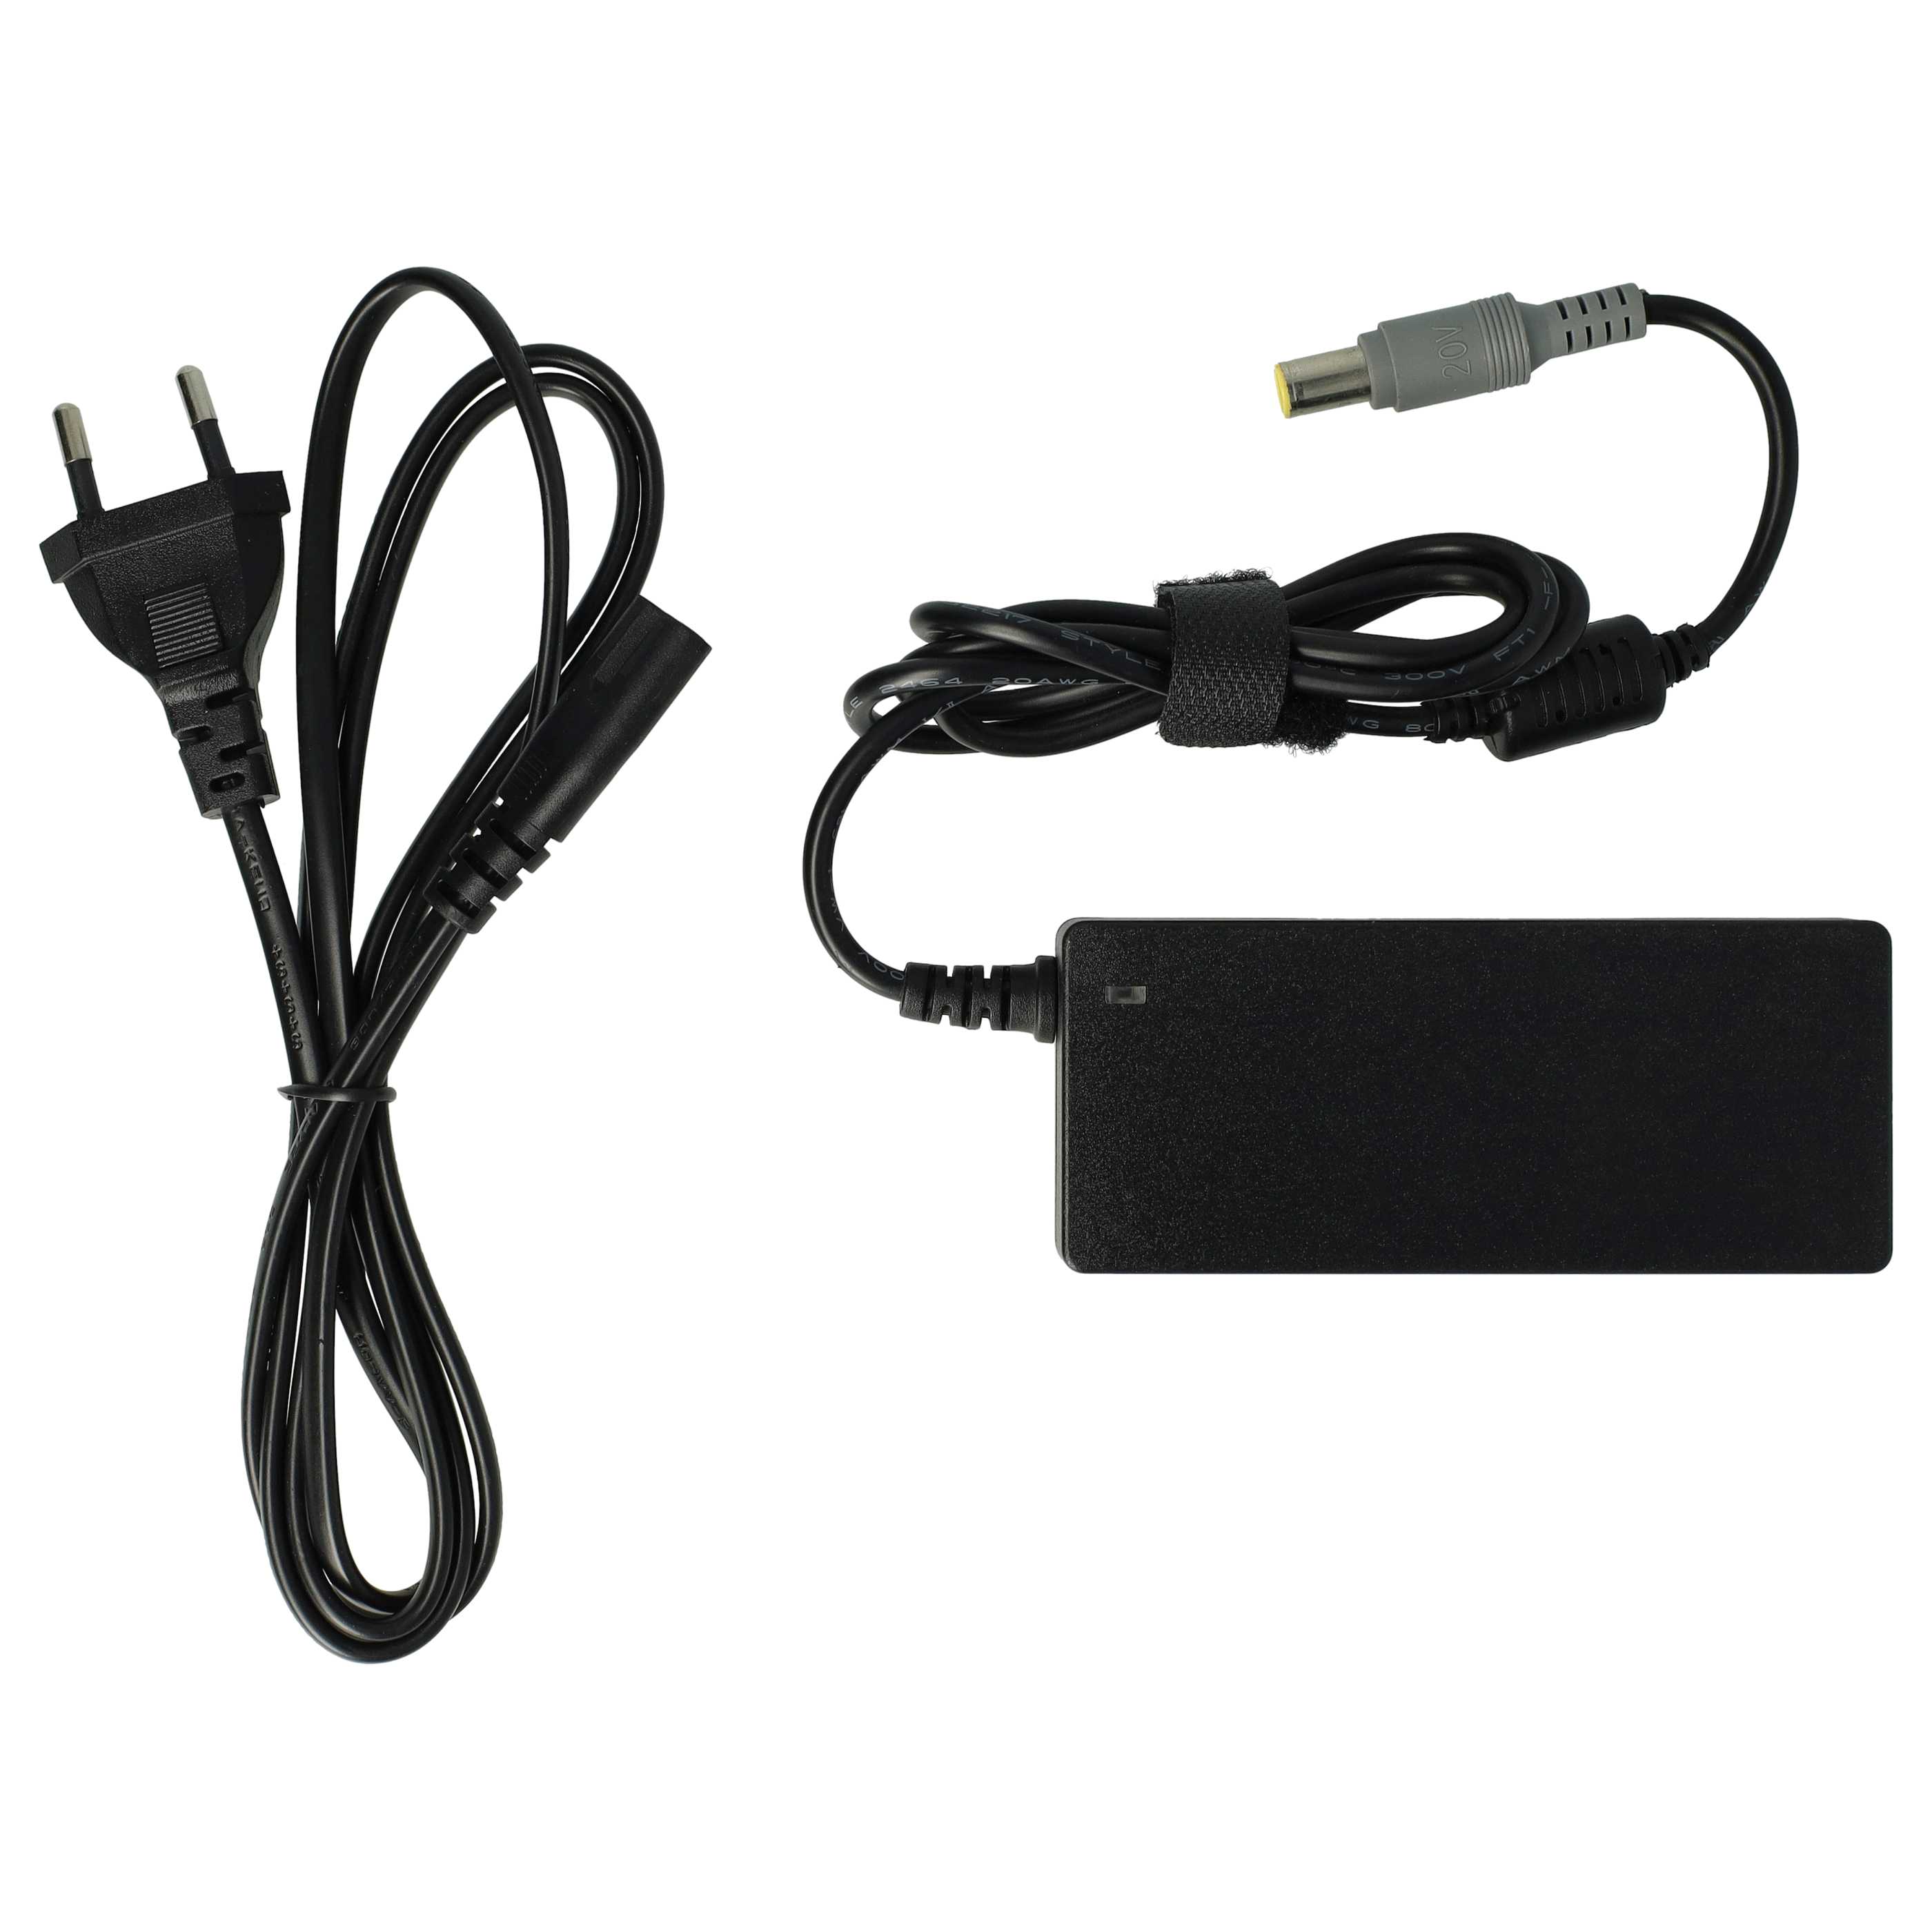 Mains Power Adapter replaces IBM / Lenovo 40Y7700, 40Y7696, 92P1153, 41N8460 for IBM / LenovoNotebook, 65 W